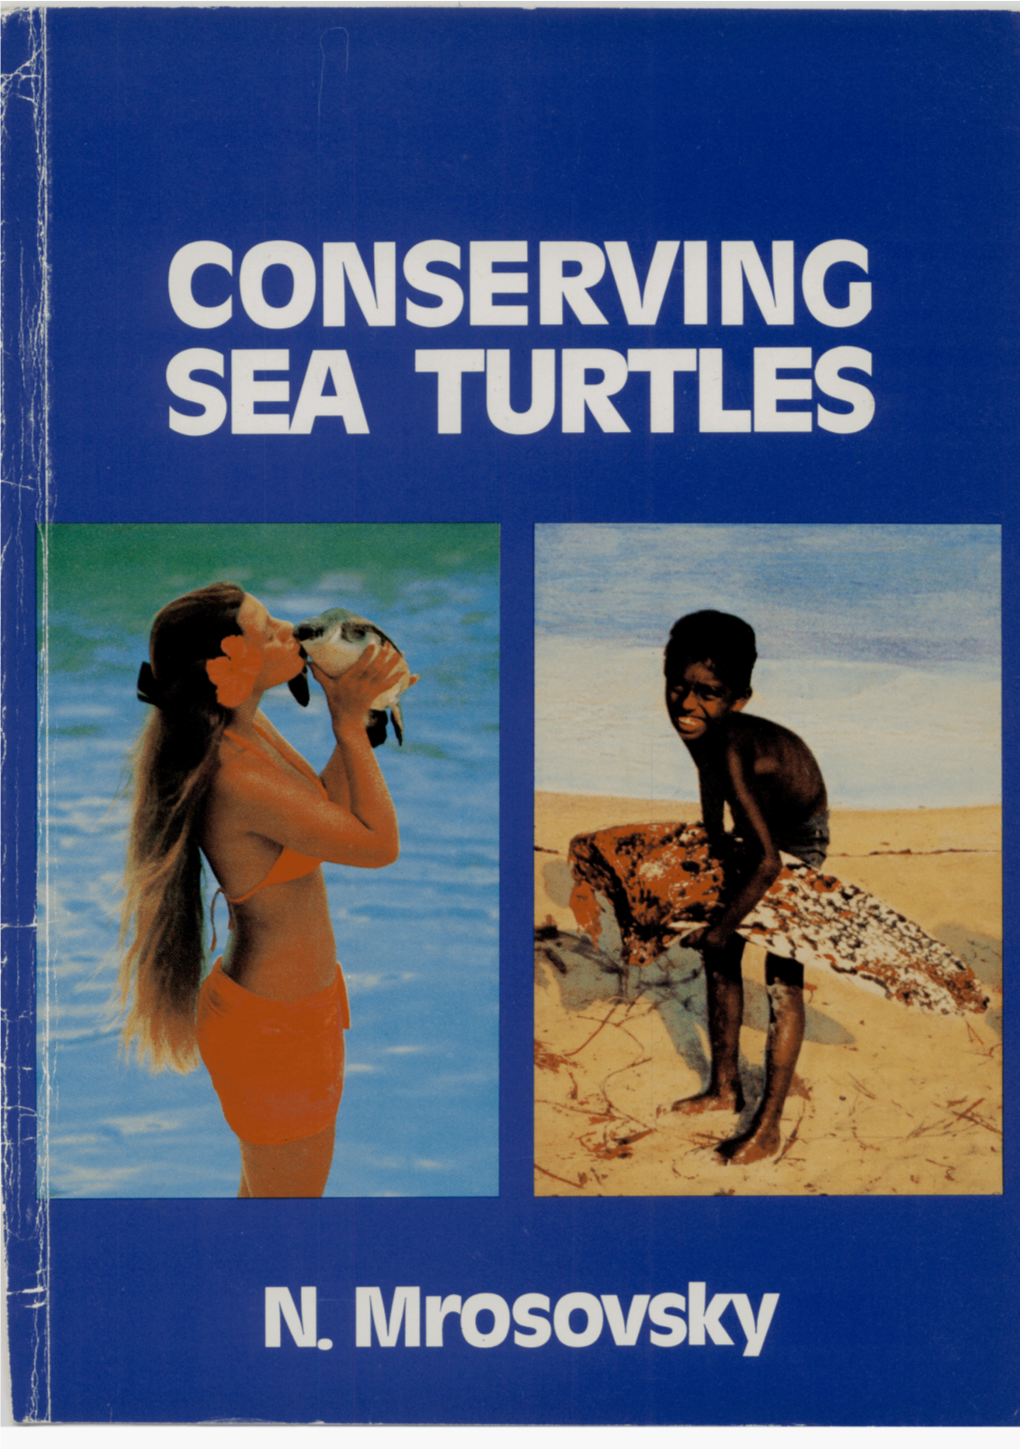 Conserving Sea Turtles